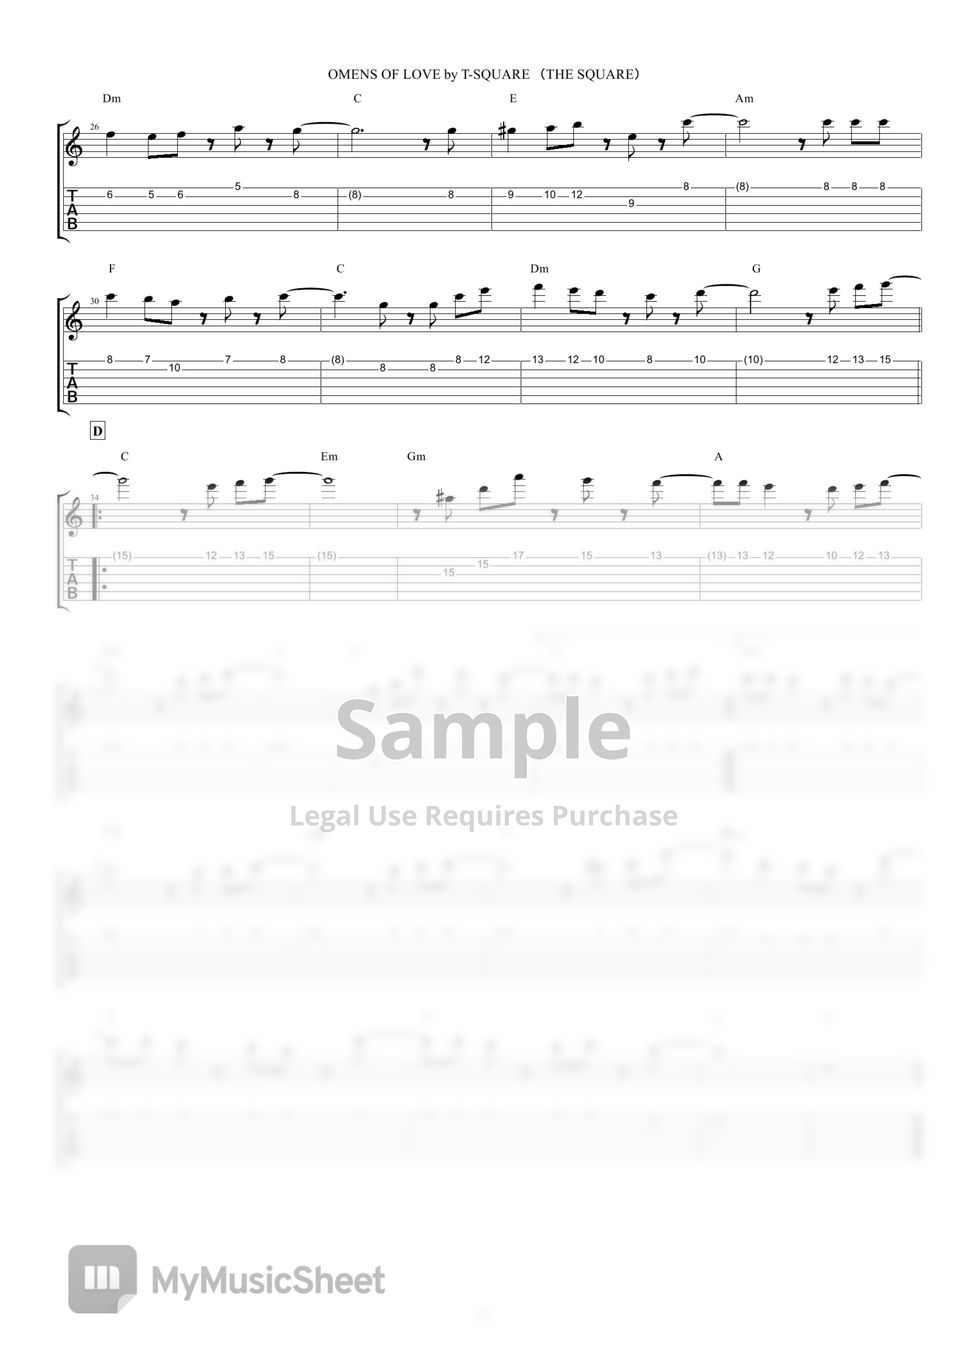 T-SQUARE - OMENS OF LOVE (Sheet Music) by guitar kuitar